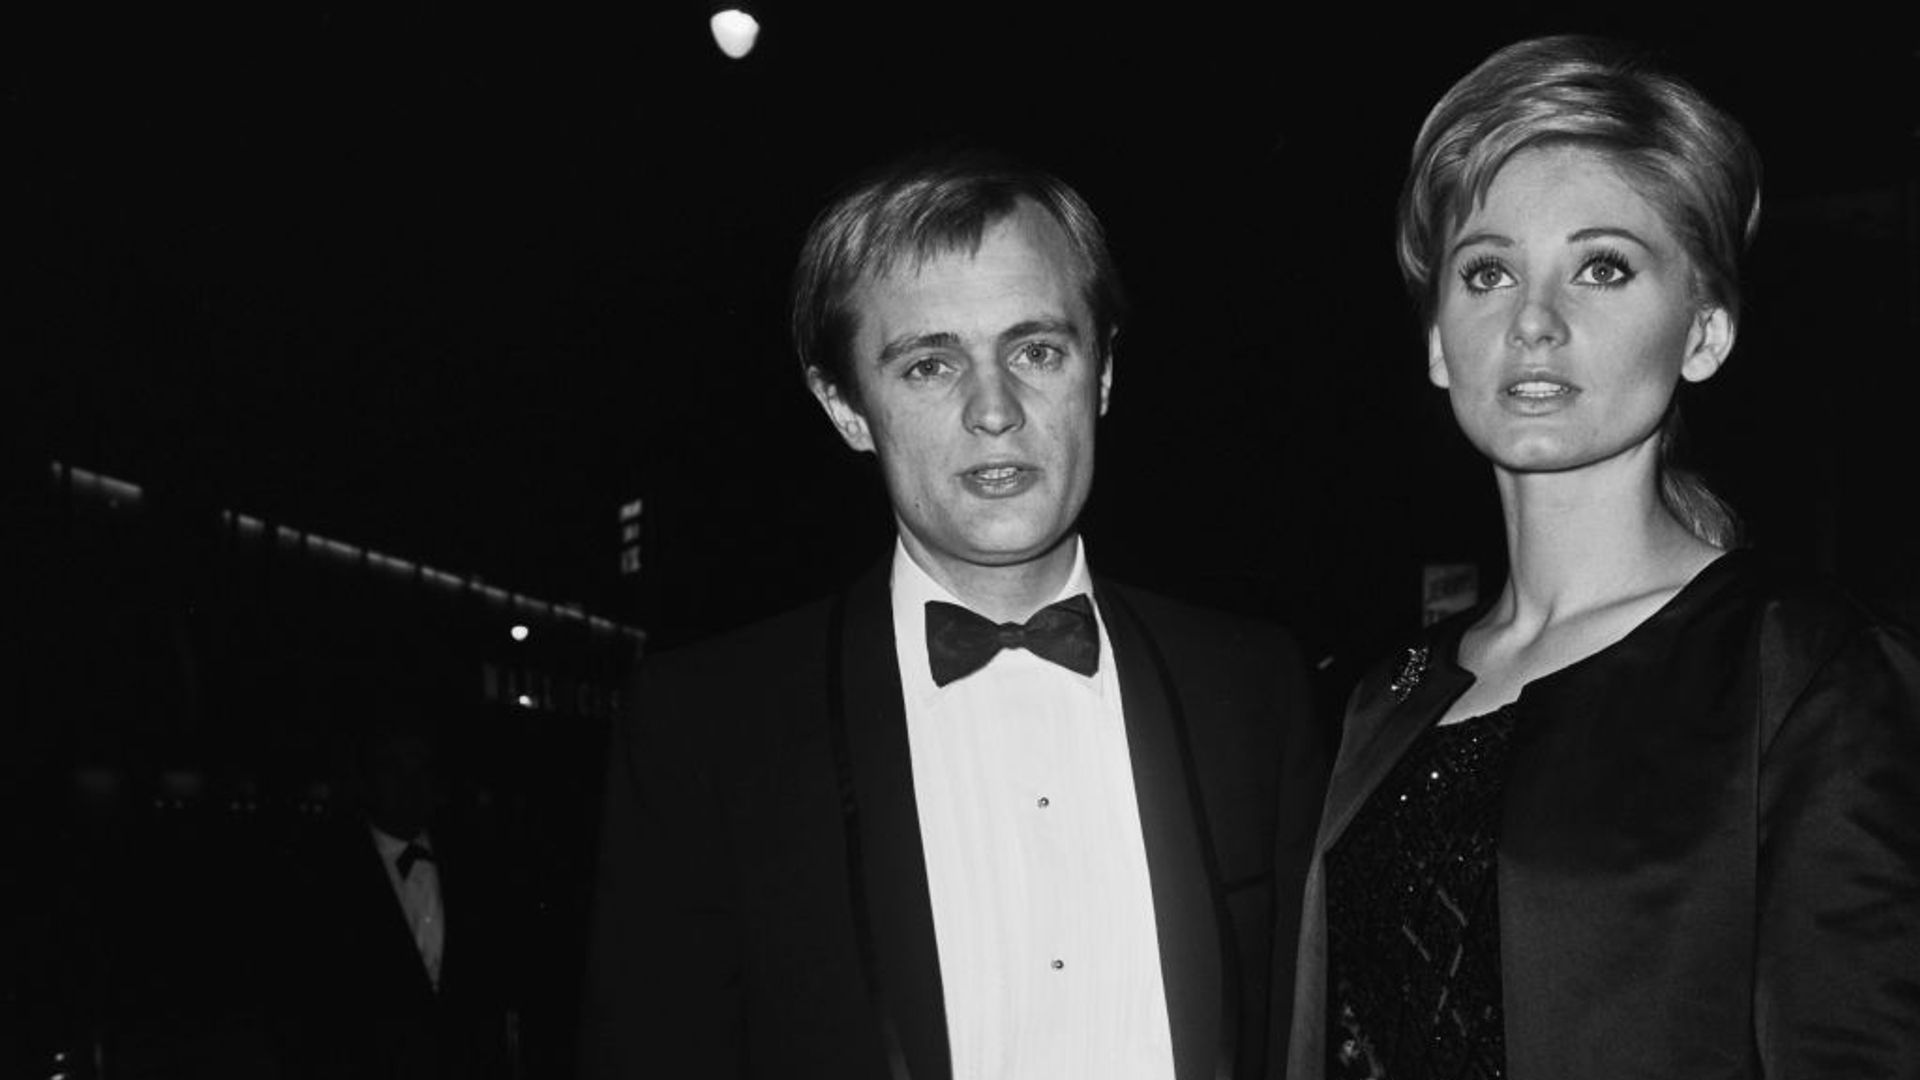 British actor David McCallum and his wife, actress Jill Ireland (1936 - 1990) at a party for the film 'The Greatest Story Ever Told